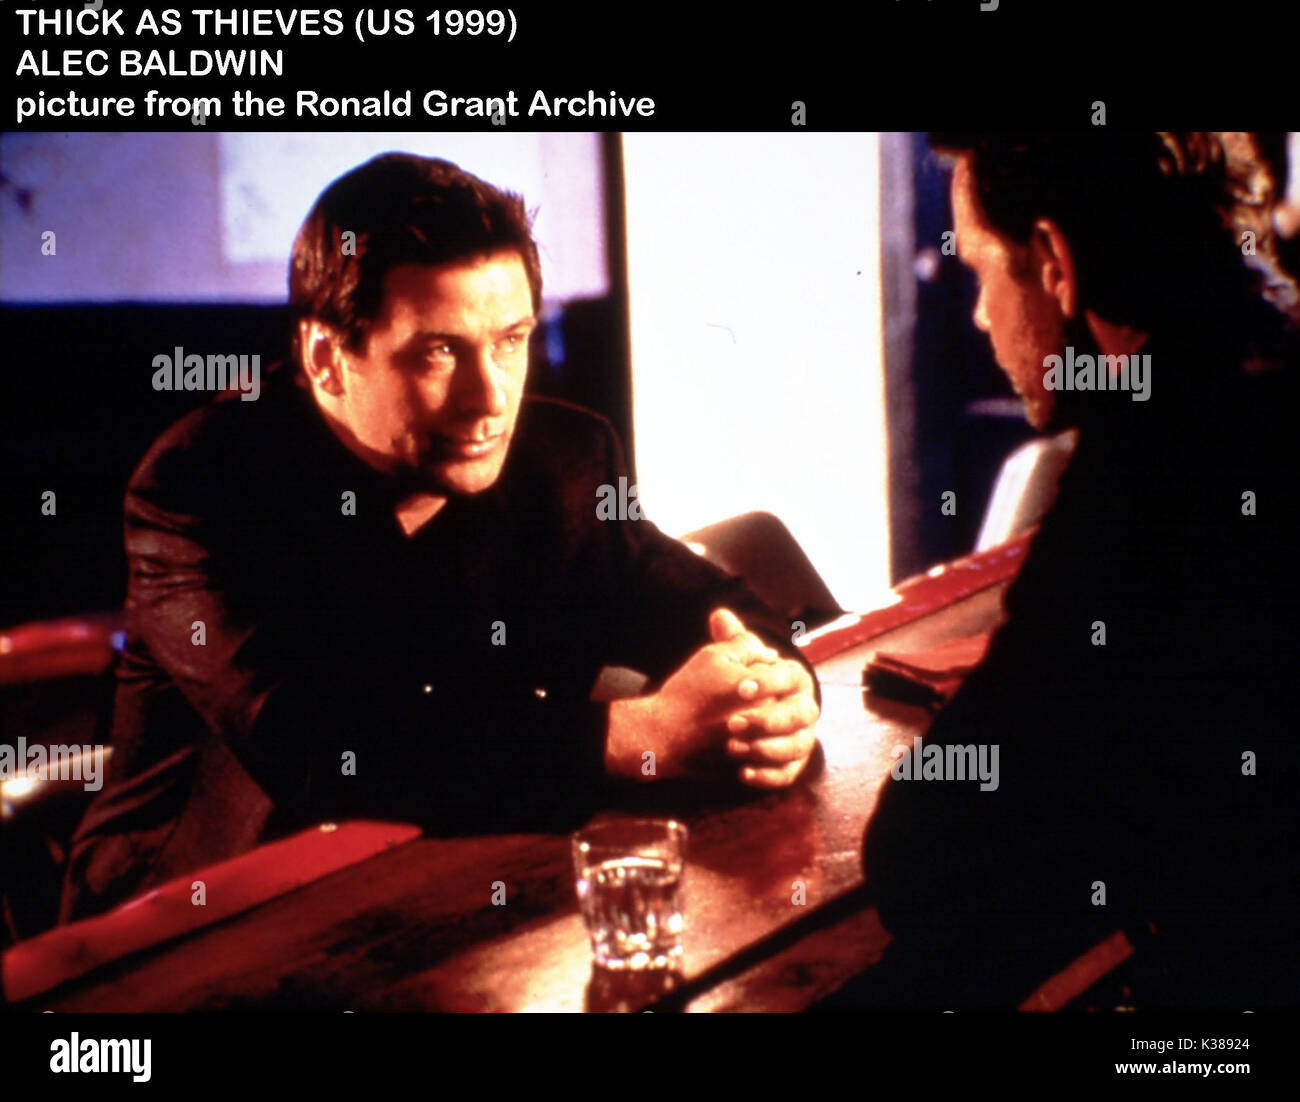 THICK AS THIEVES ALEC BALDWIN     Date: 1999 Stock Photo